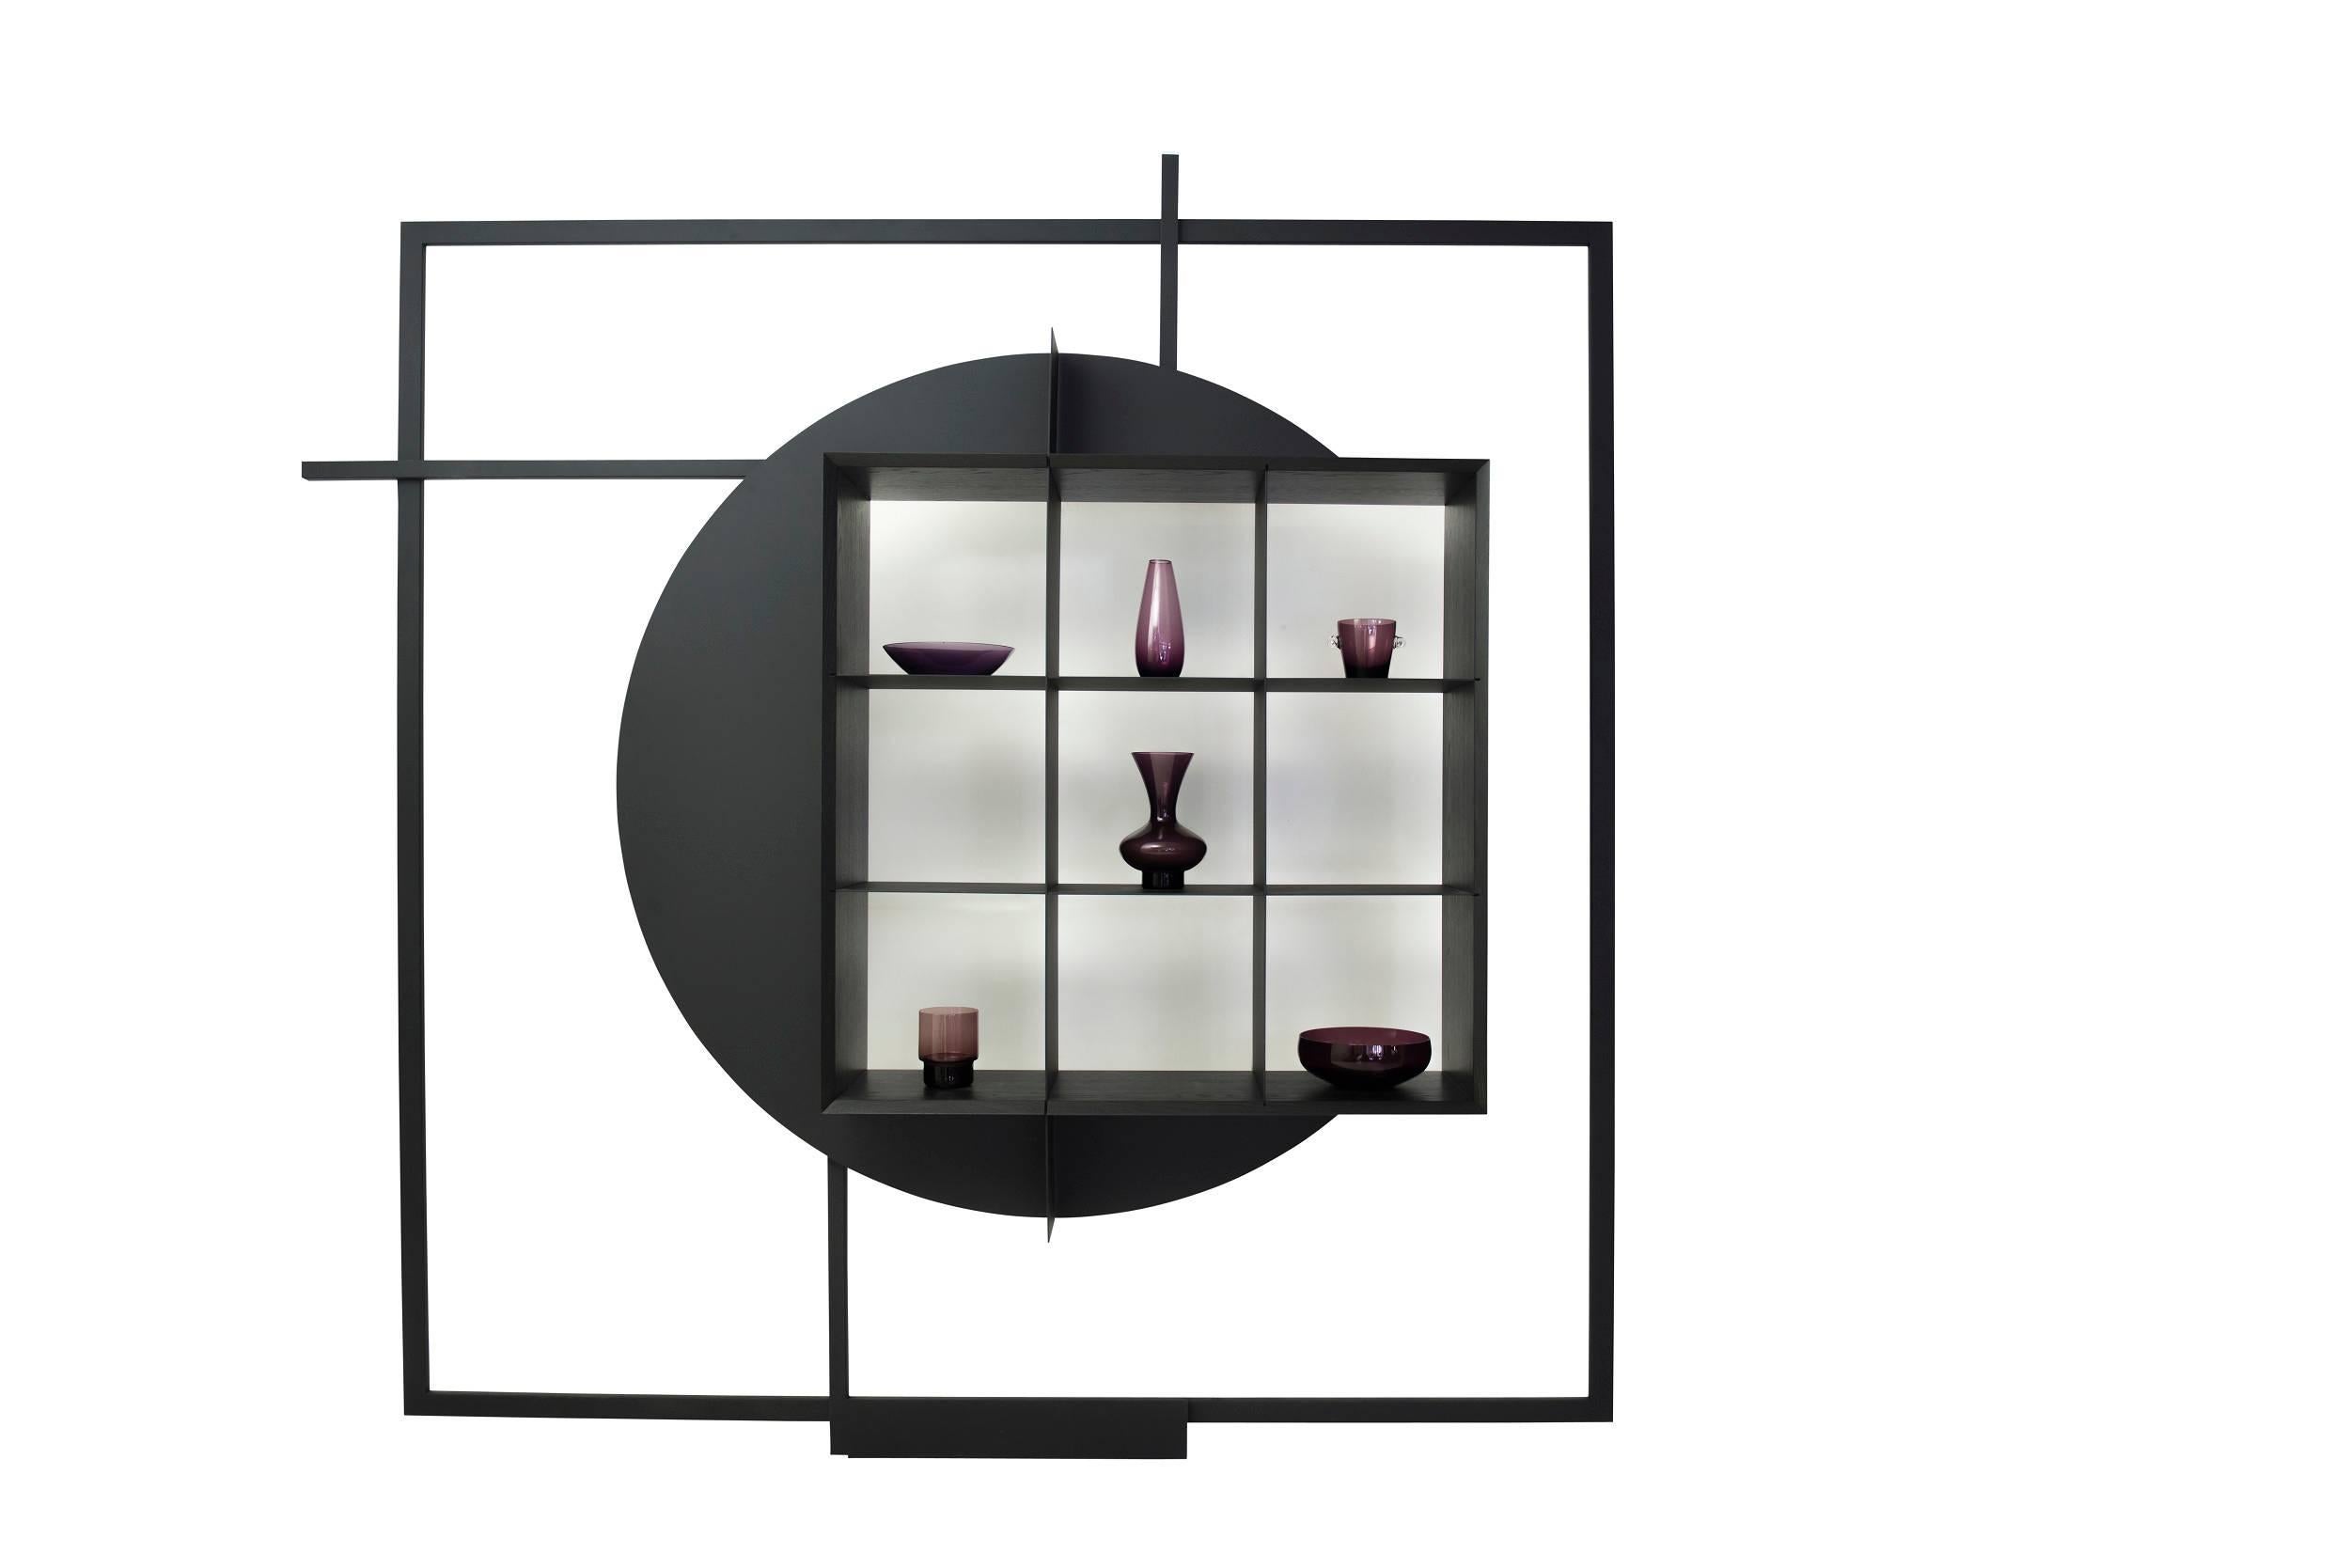 COM:POS:ITION 2.C
The constructivism design vocabulary shaped these extraordinary shelf and vitrine. Itself an art object, it constituted the perfect frame to showcase other art objects.
Steel frame: matte finish powder-coated
Shelf frame: